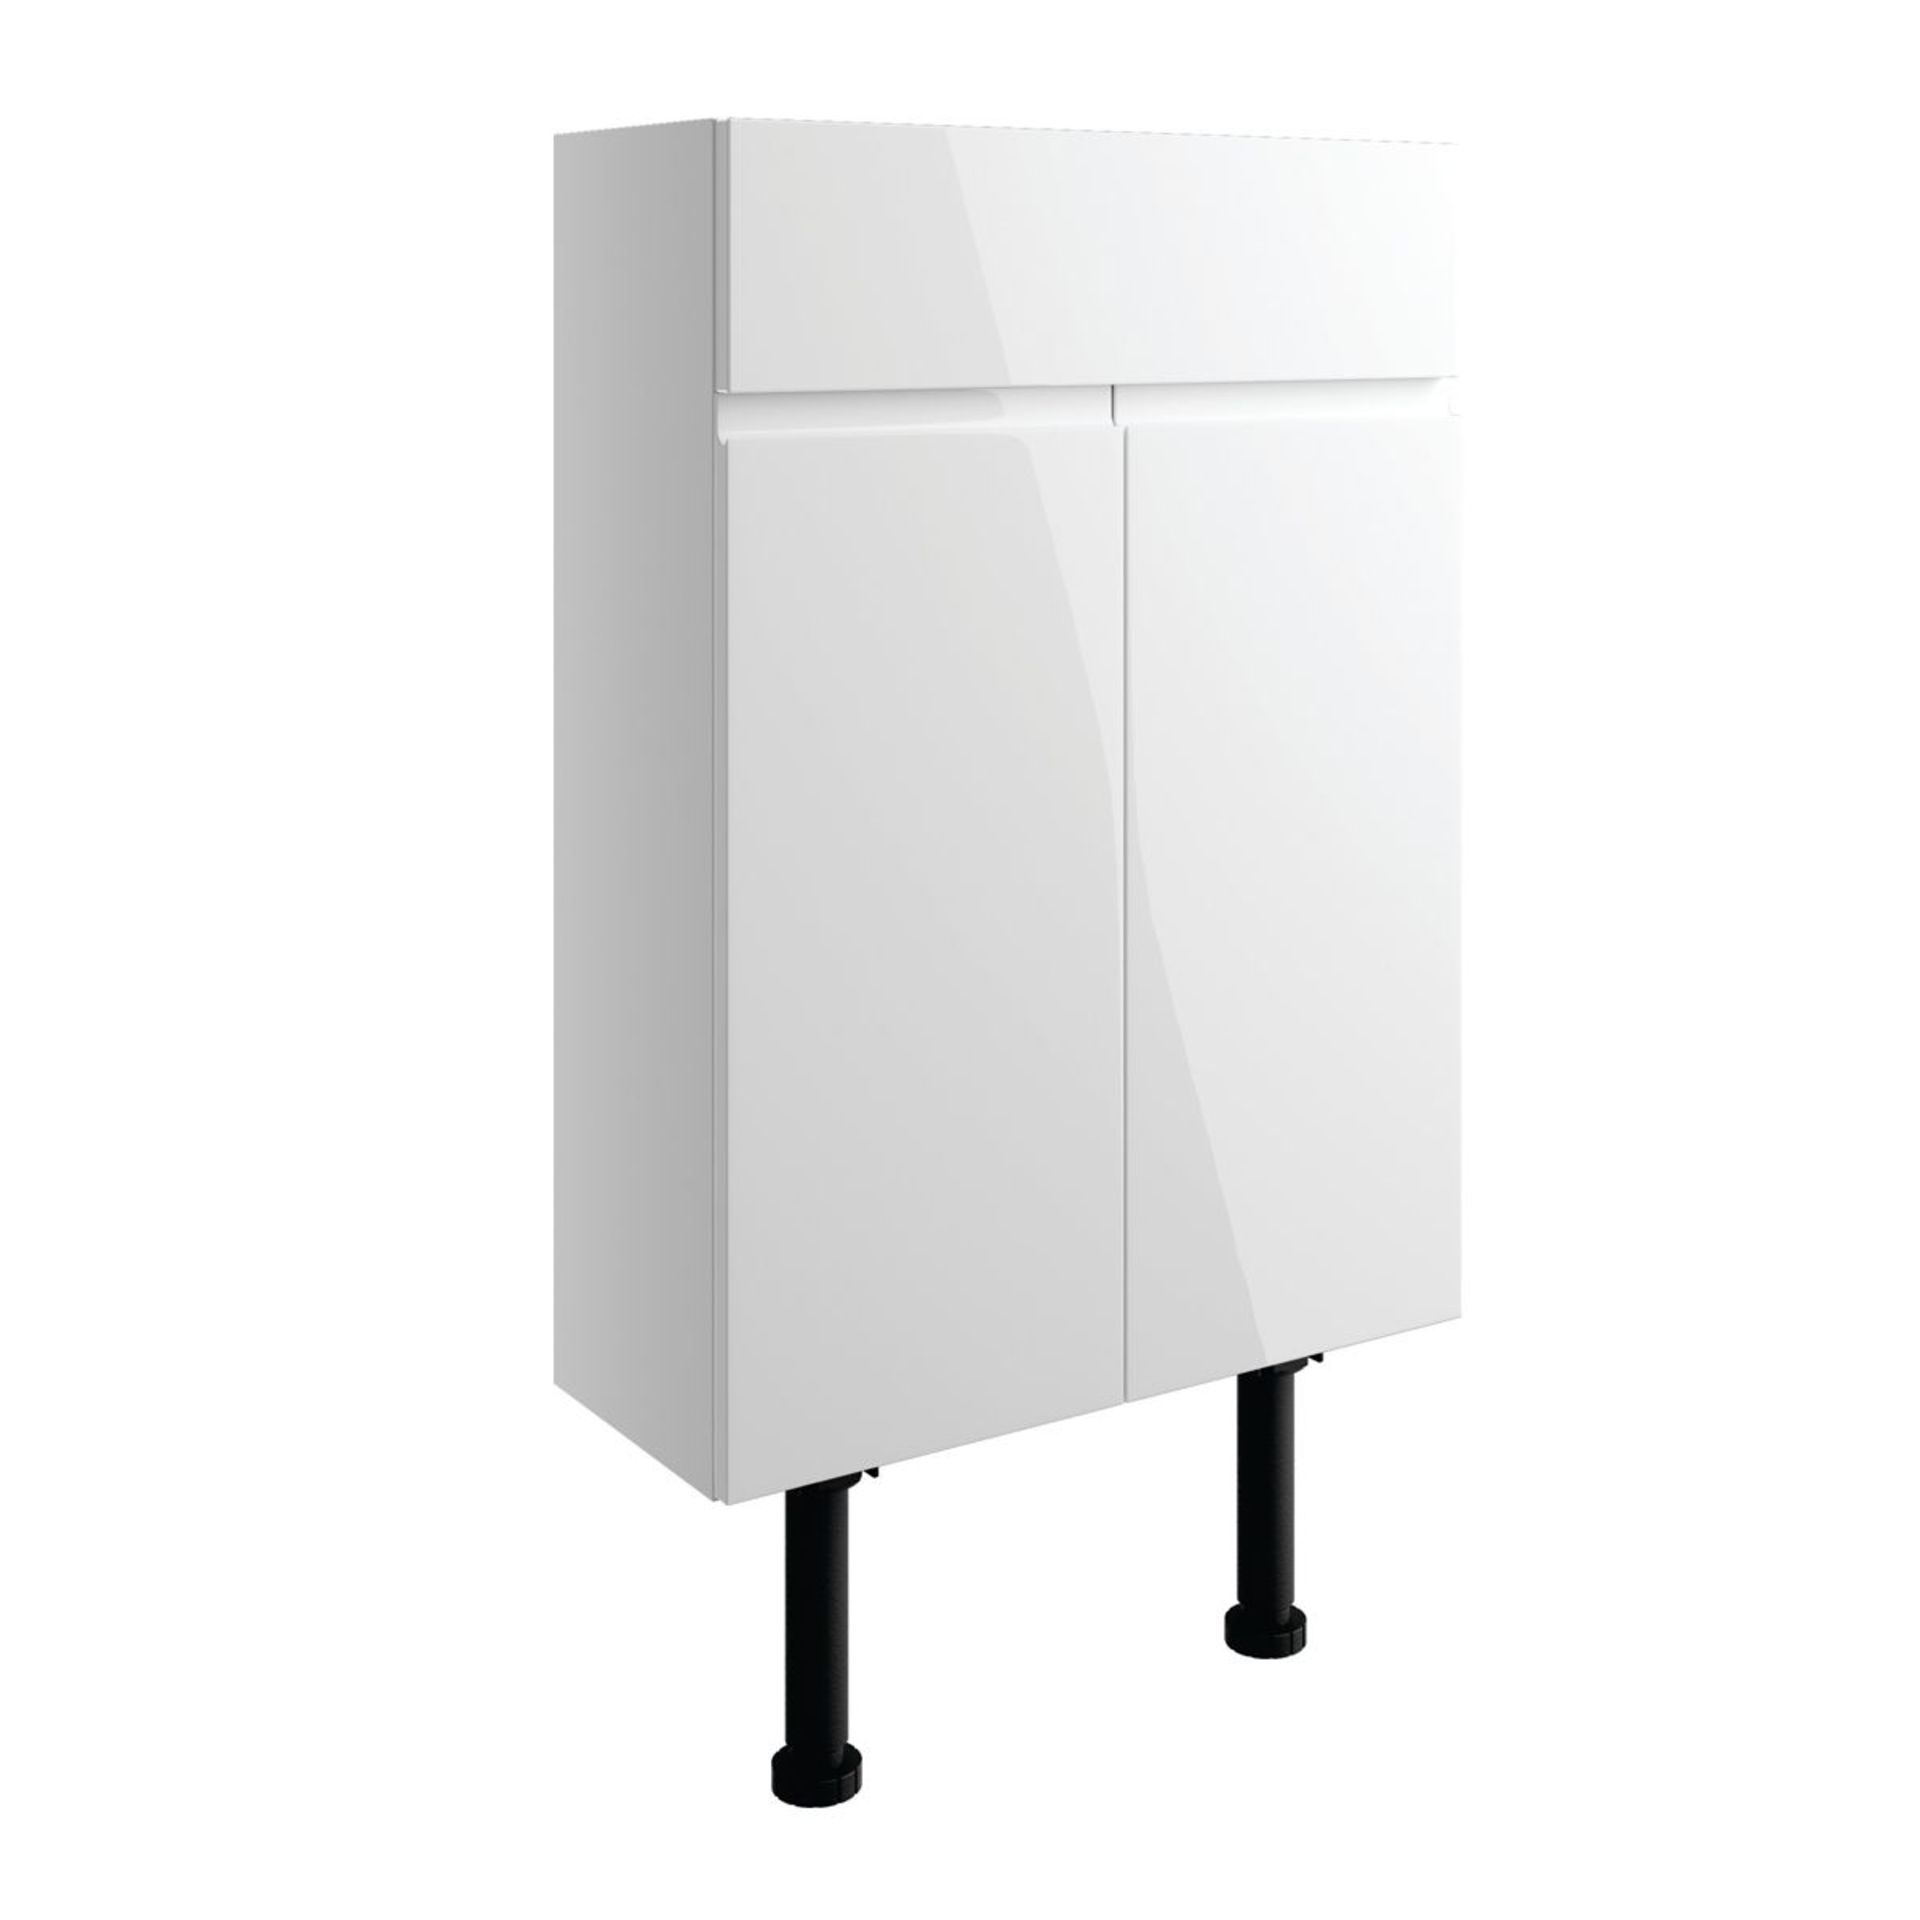 New (L101) Valesso White Gloss Vanity Unit 600 mm. RRP £305.00.Finished In White Gloss Adjustab - Image 2 of 2